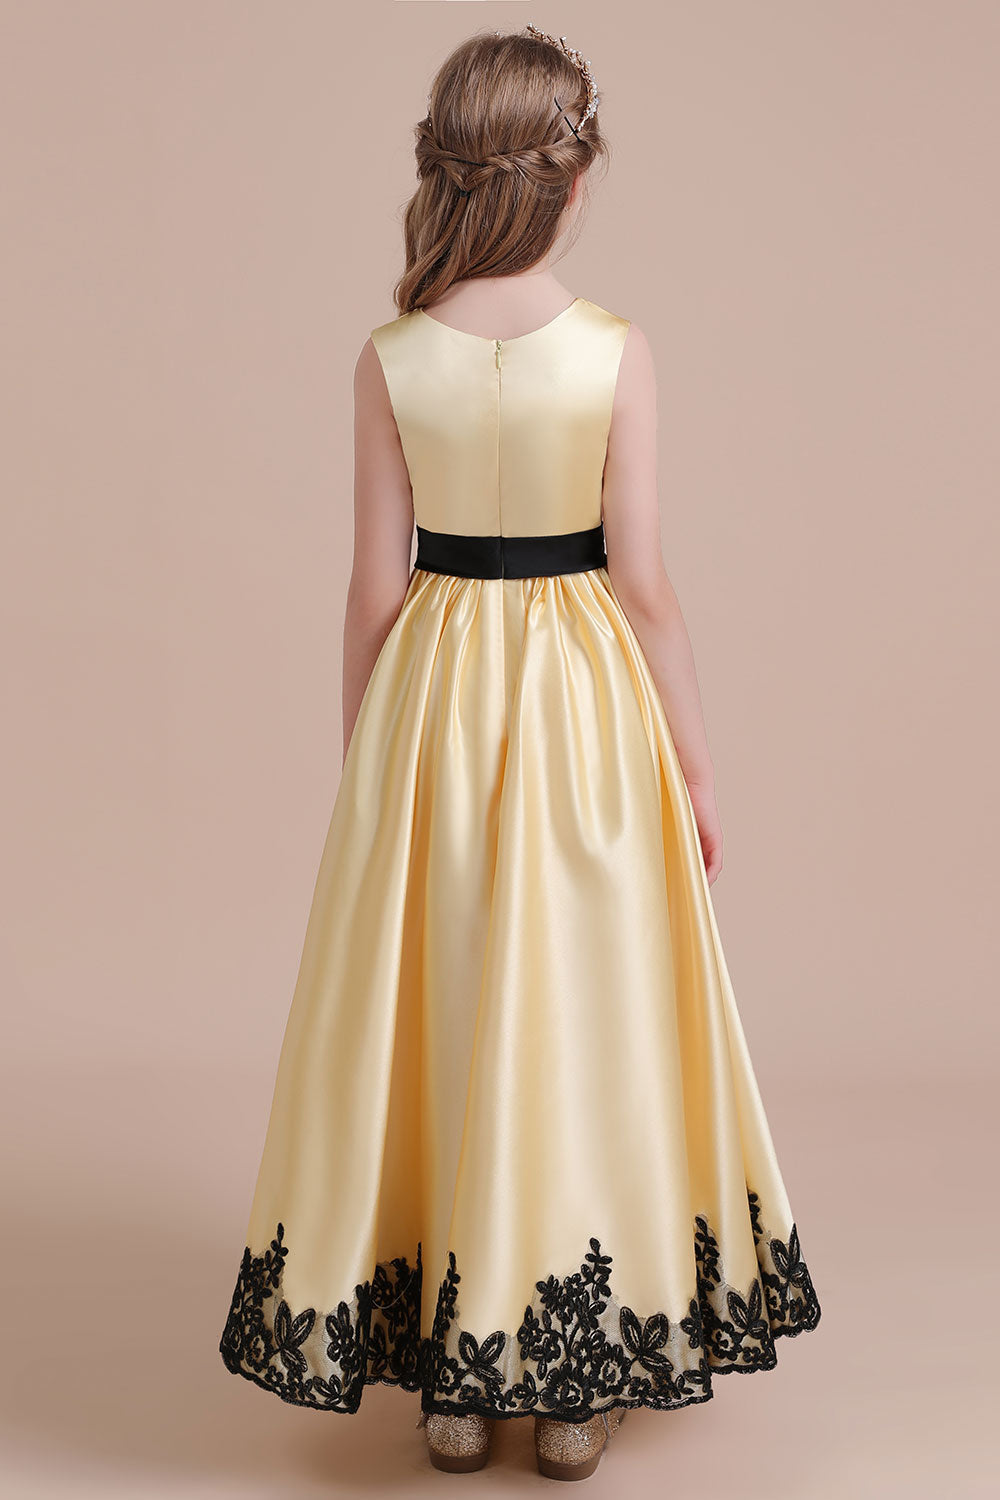 A-Line Chic Bow Appliques Satin Flower Girl Dress Online